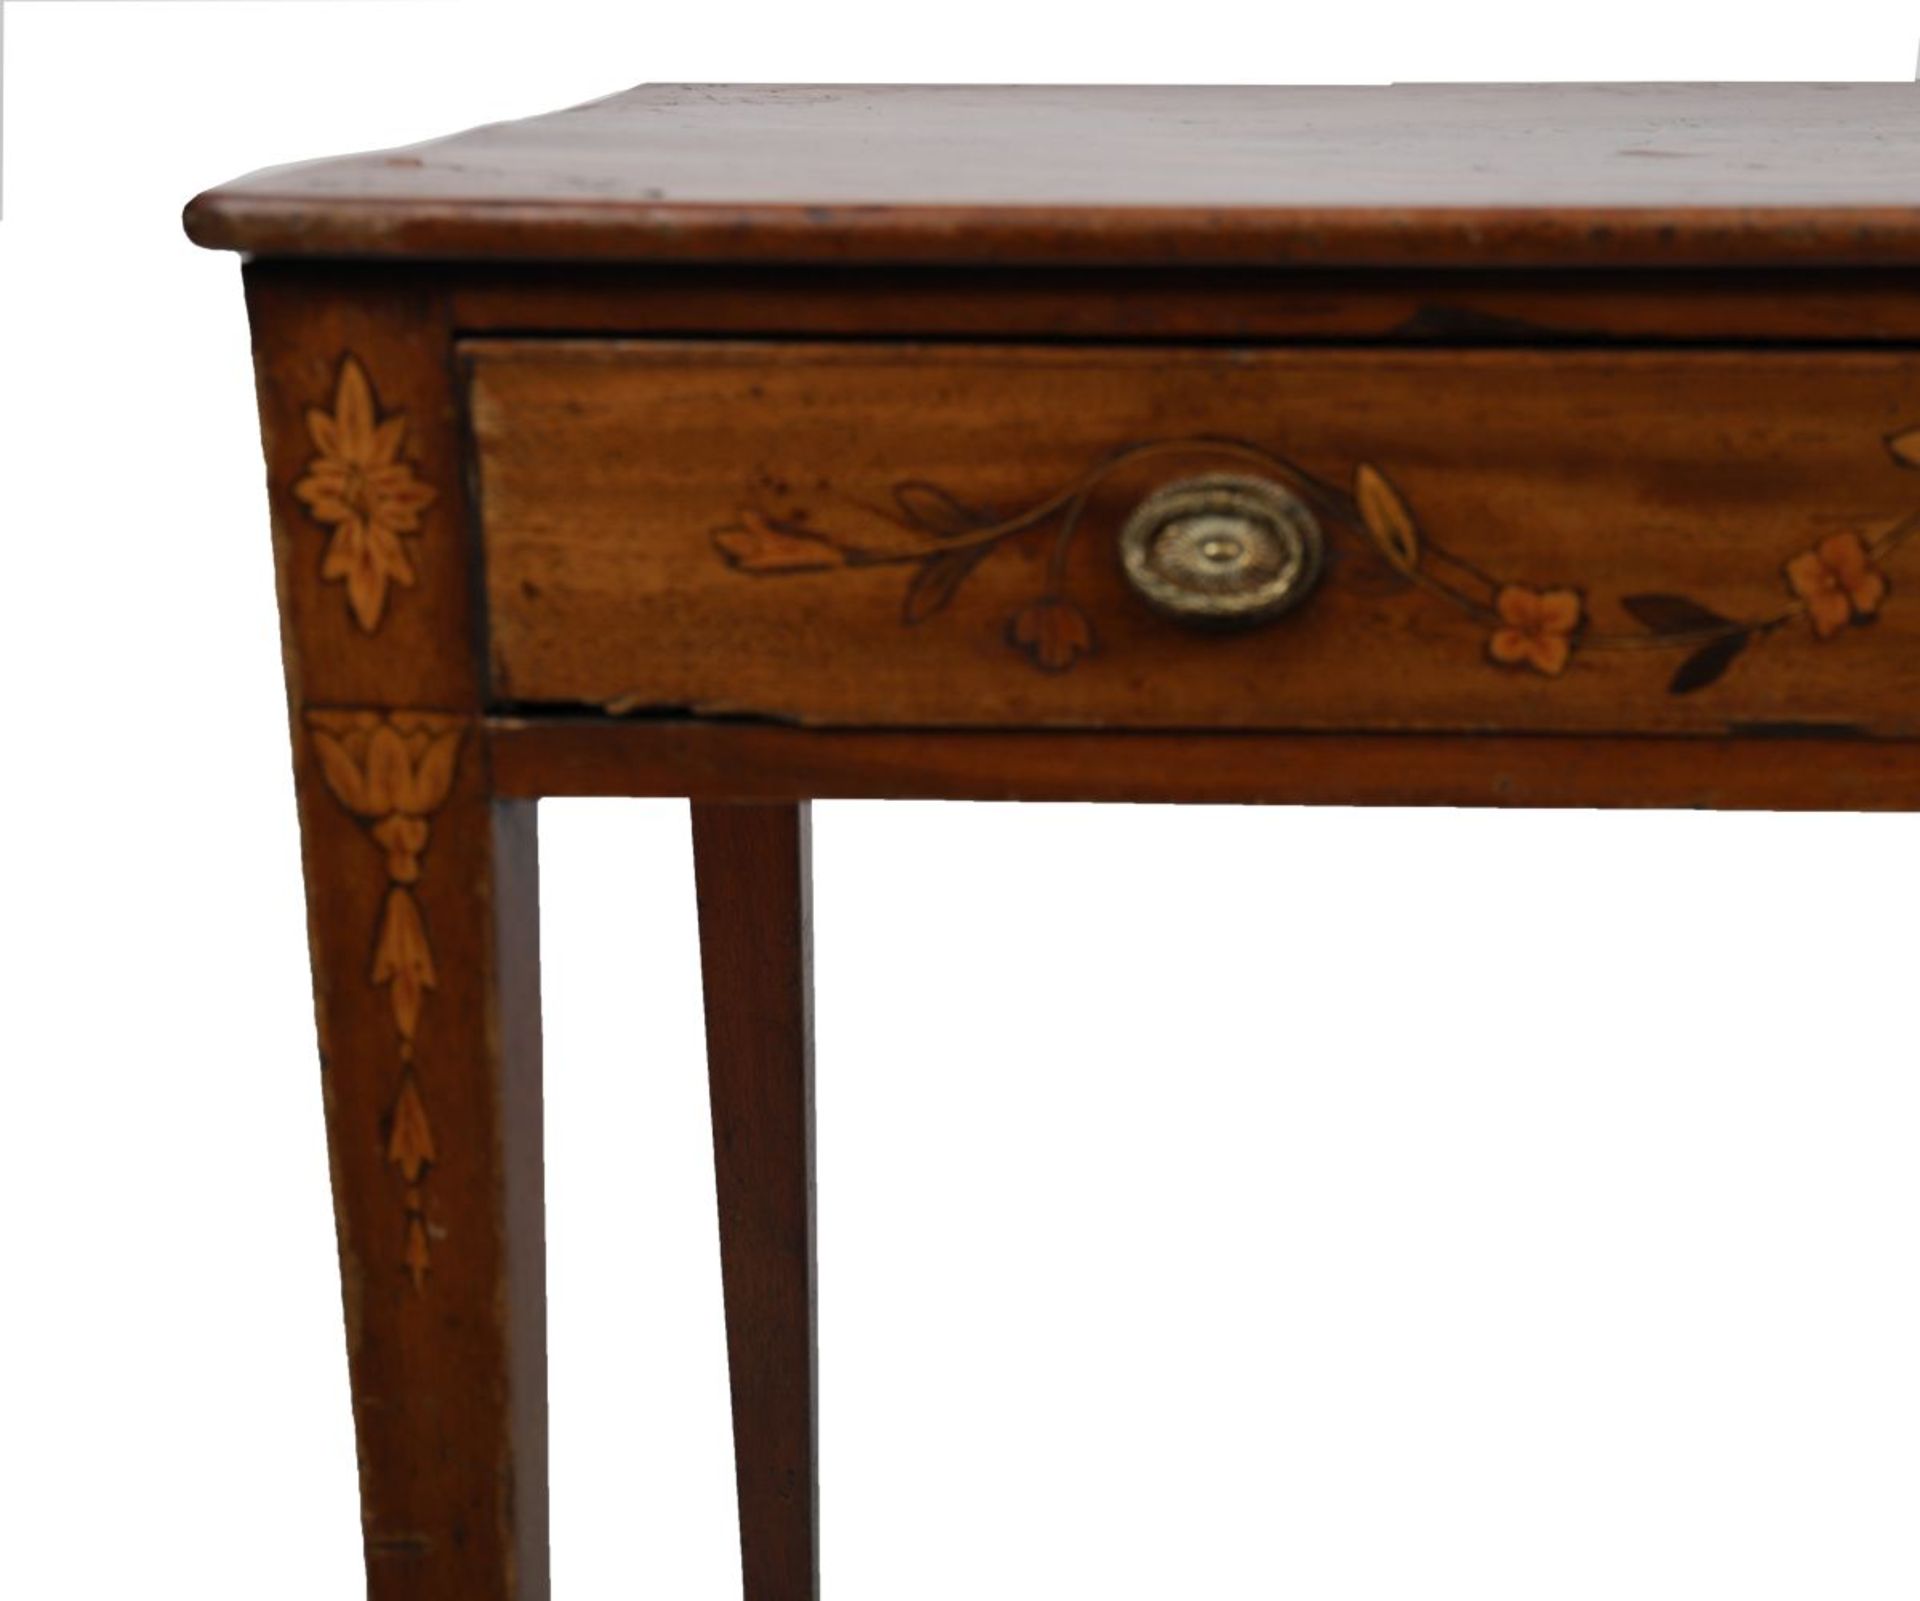 GEORGE III MAHOGANY & MARQUETRY TABLE - Image 3 of 3